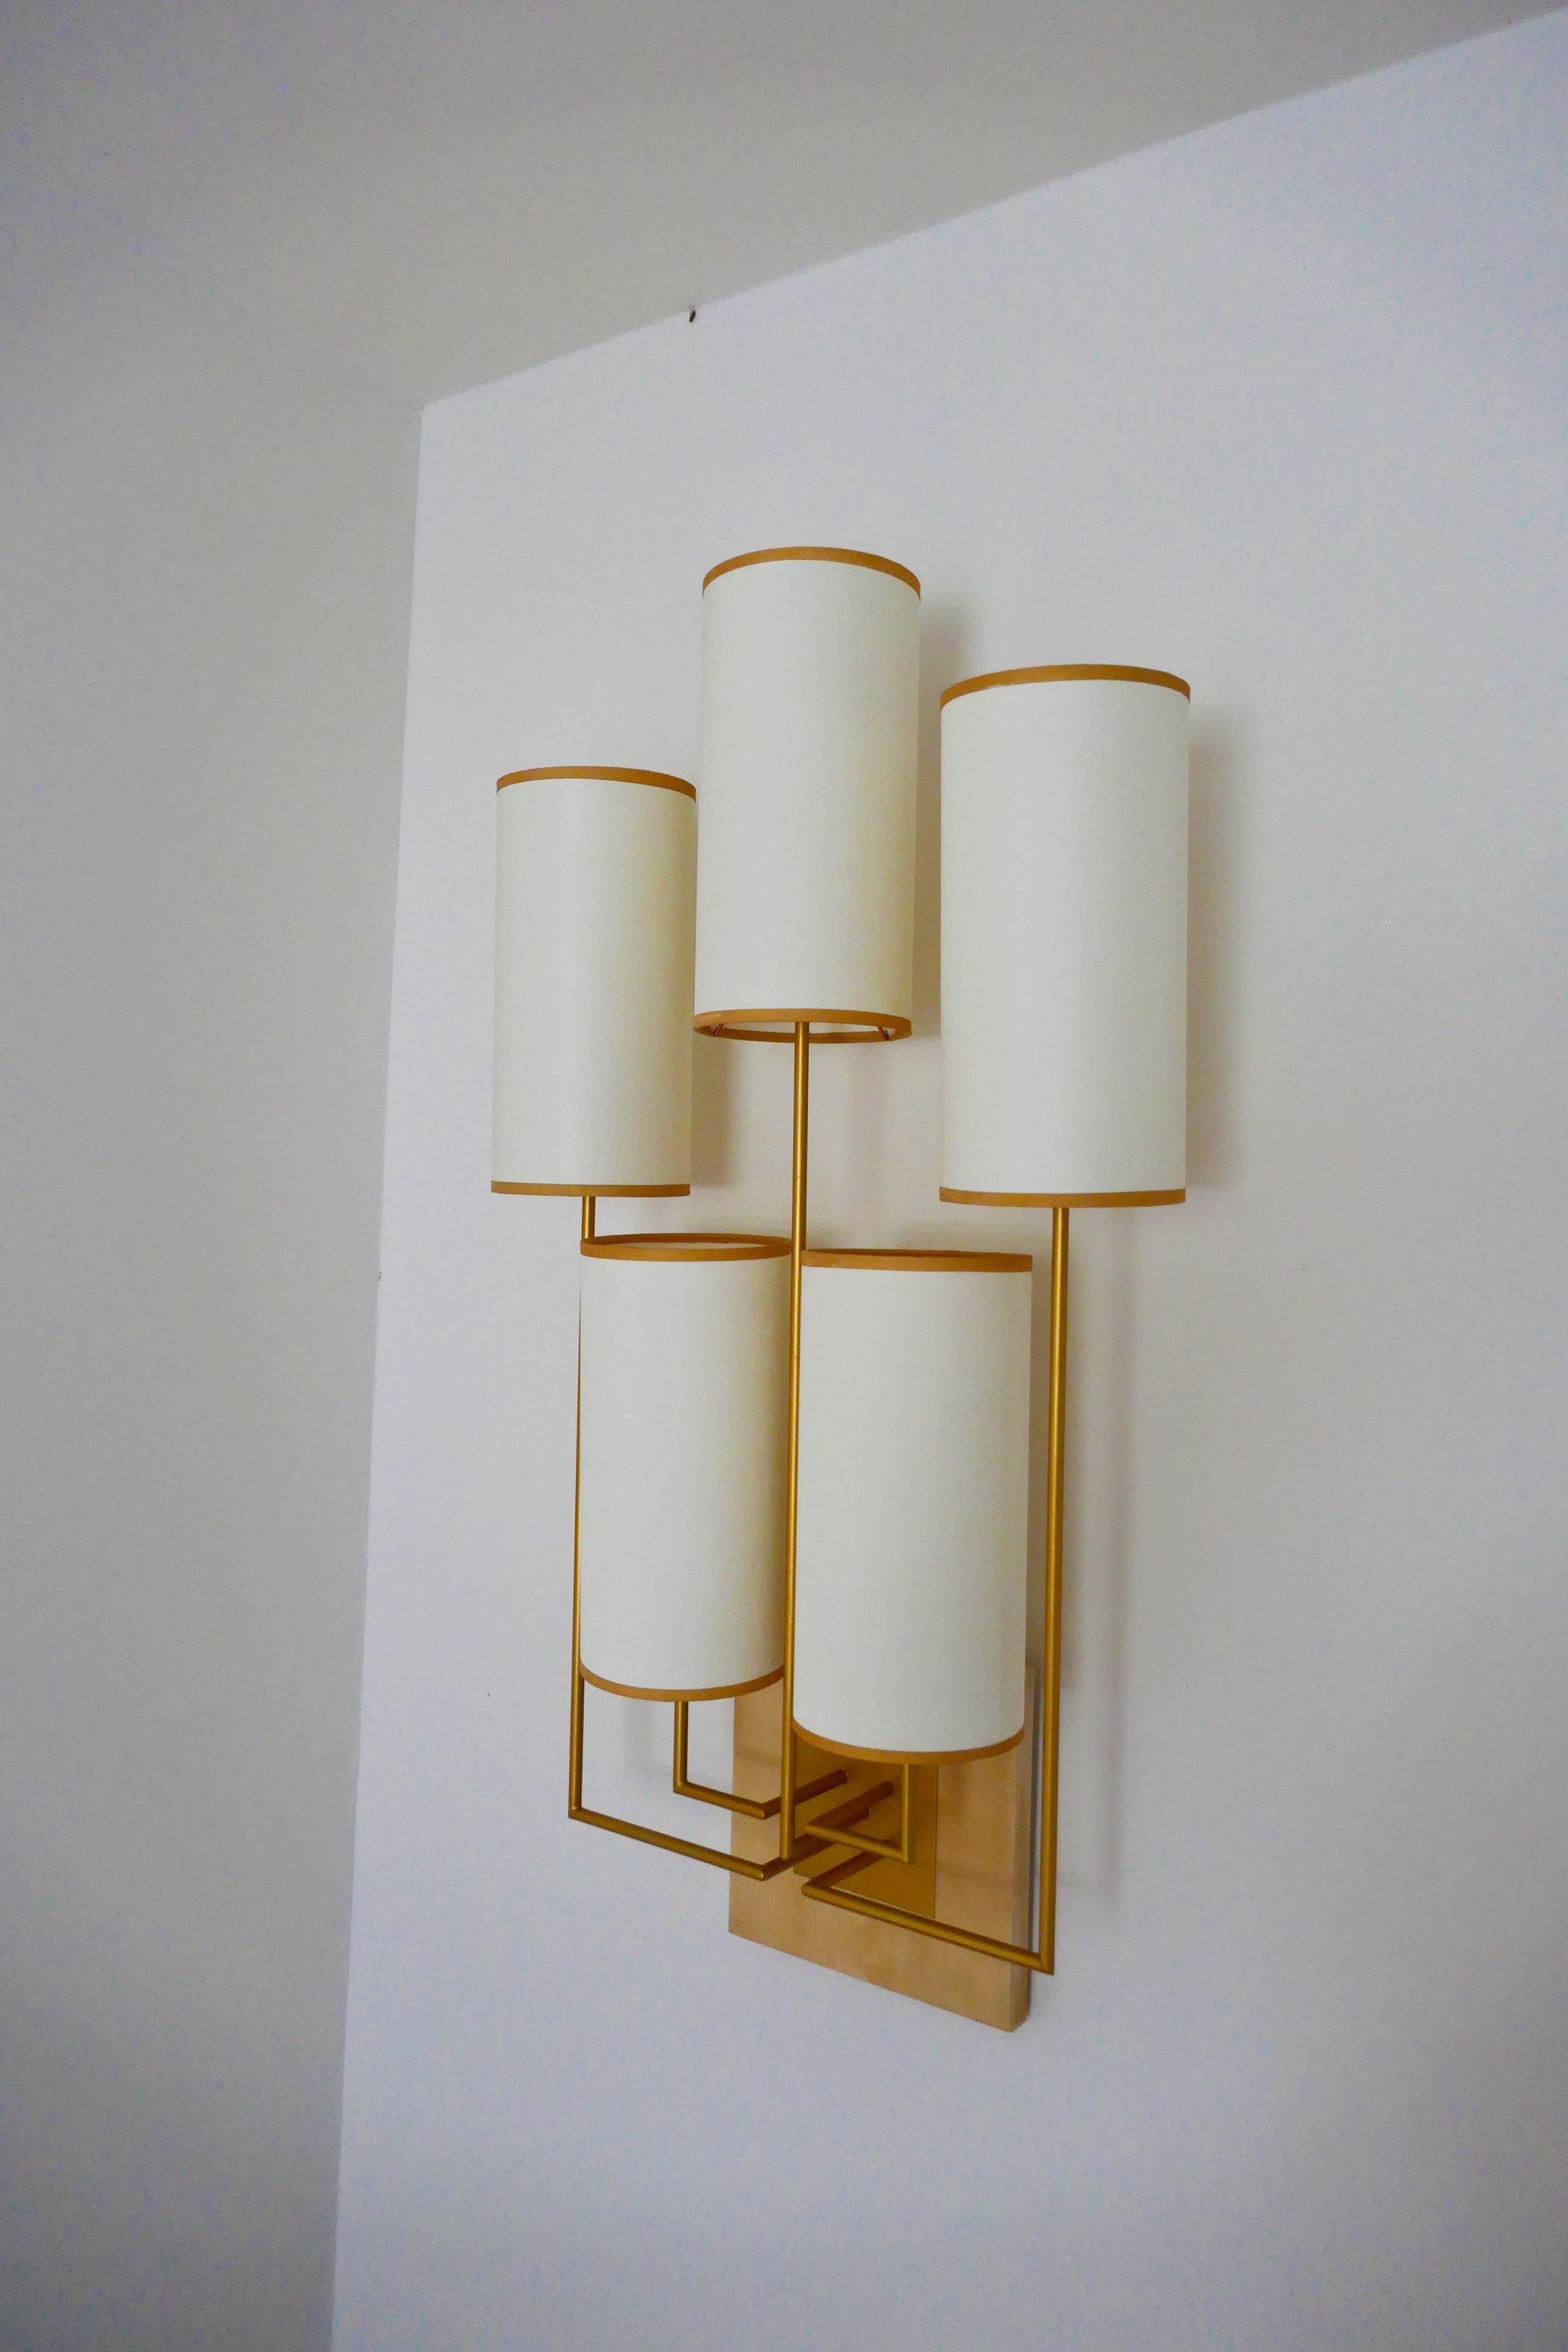 Pair of Wall Lamp Sconce in Gold Patina and White Fabric Lamp Shades For Sale 4